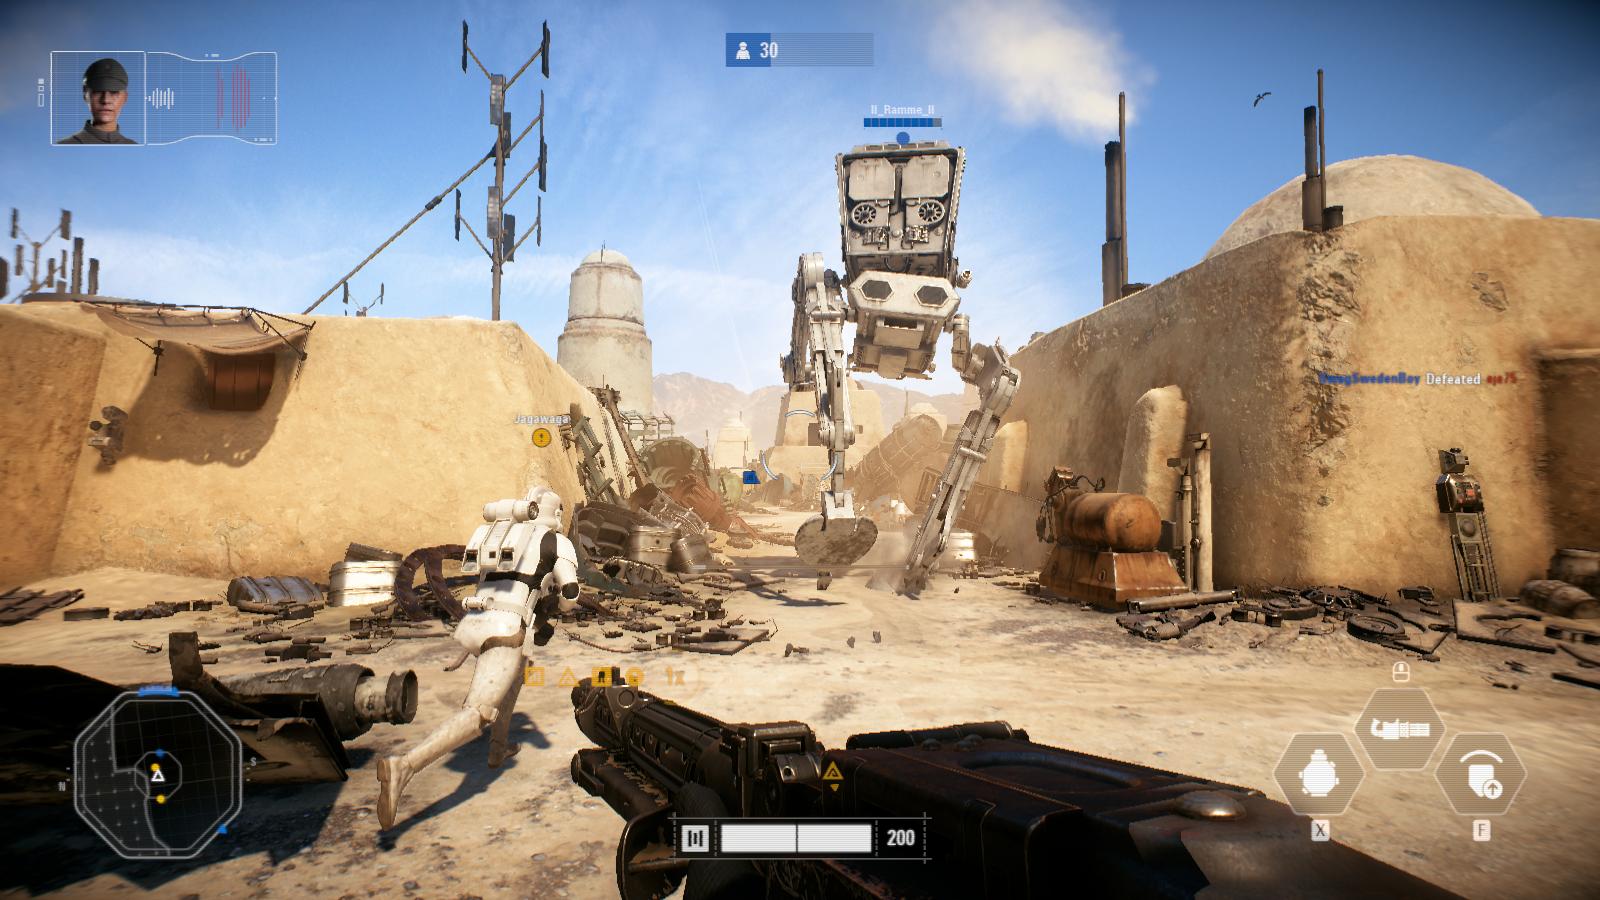 Is it possible to play Battlefront 2 with private servers?